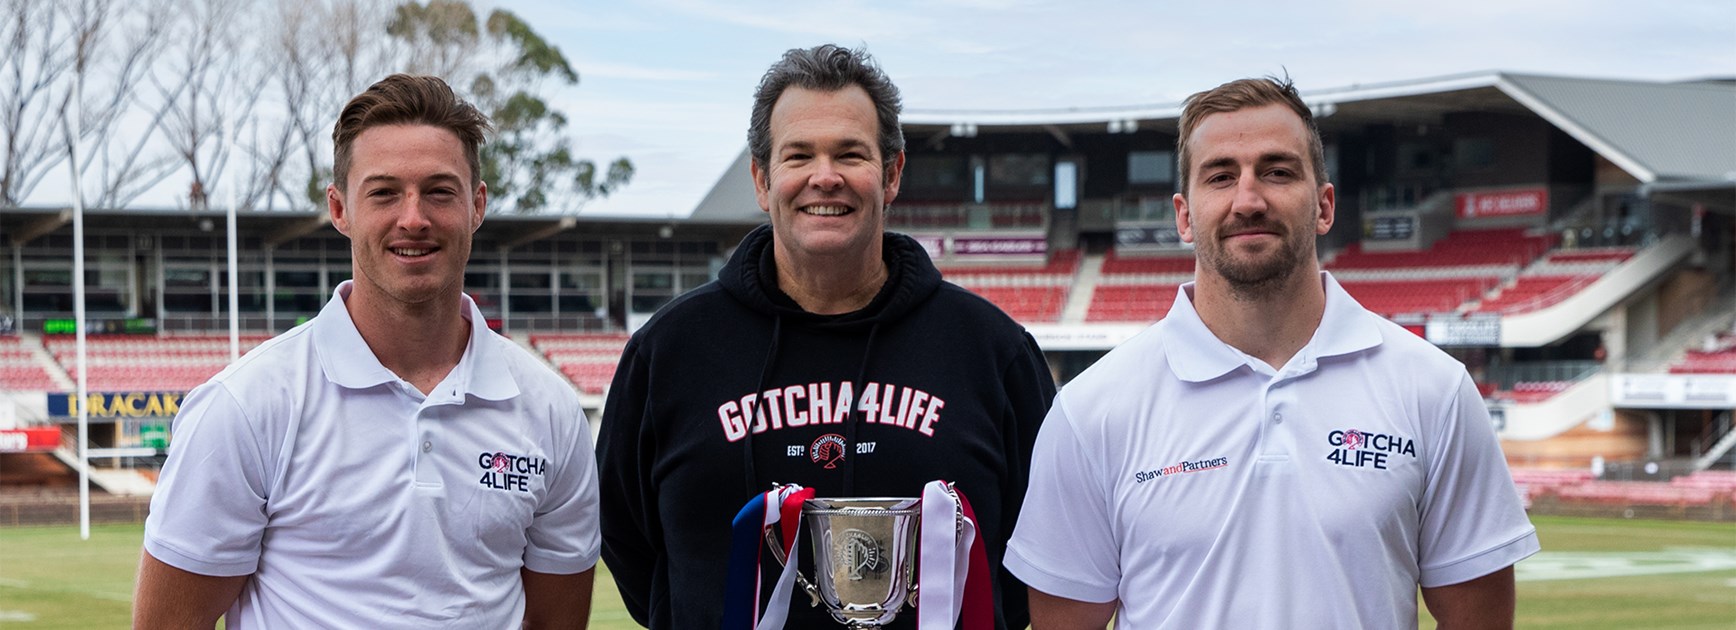 Shaw and Partners support inaugural Gotcha4Life Cup